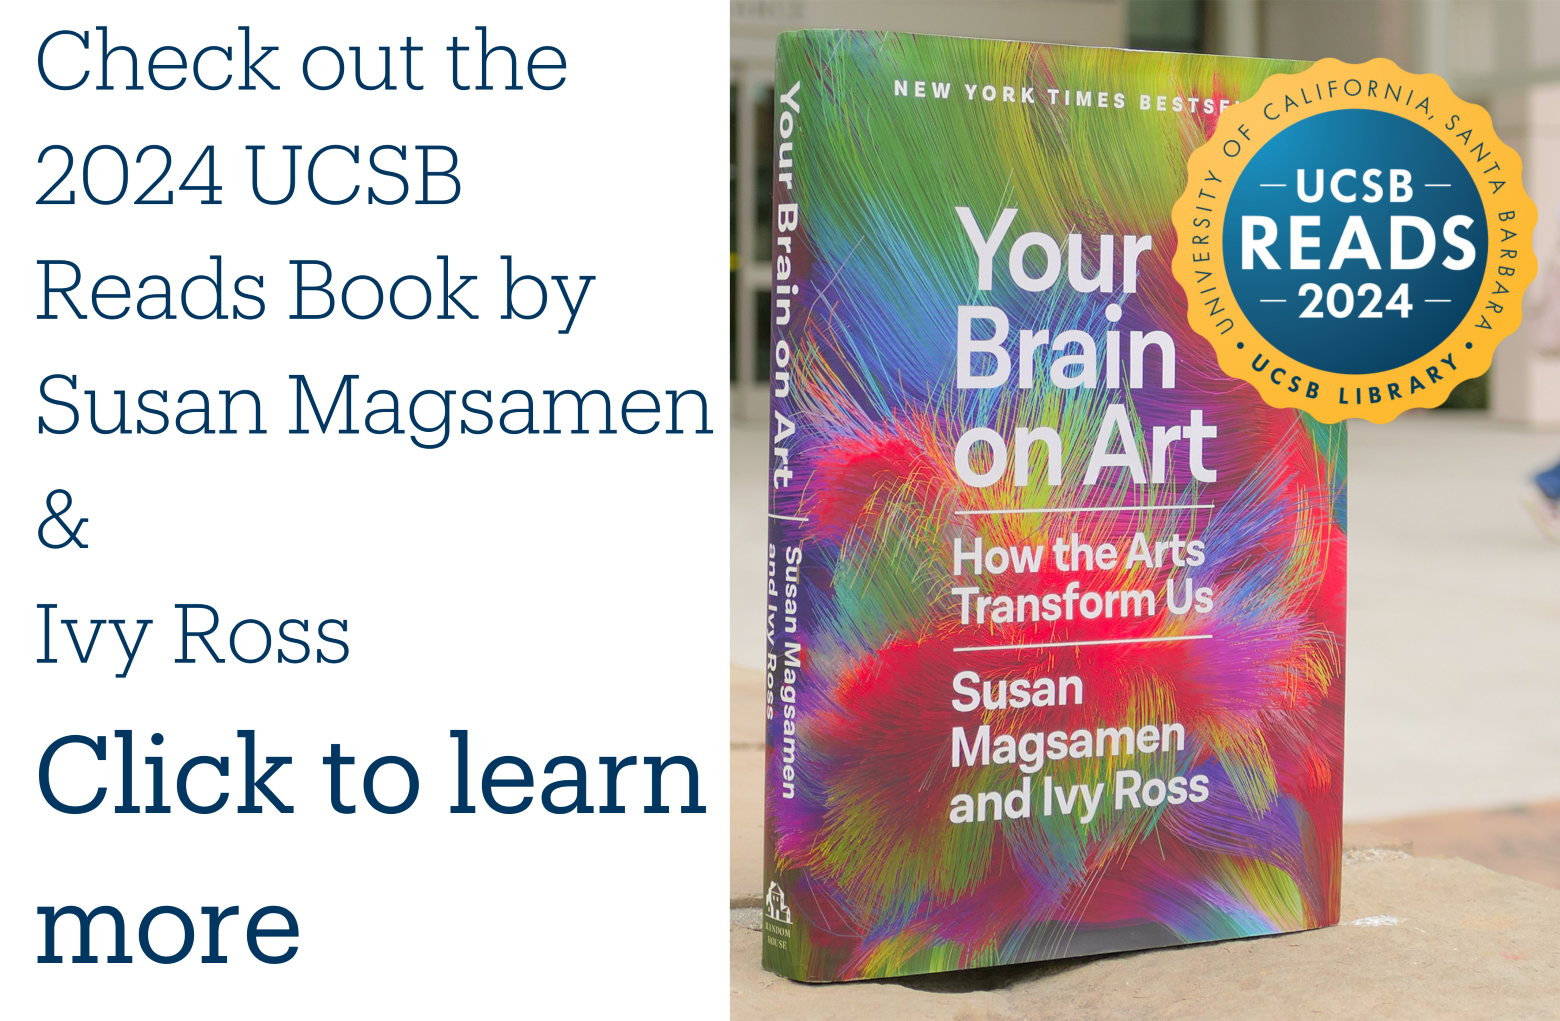 The book for UCSB Reads 2023, Your Brain on Art